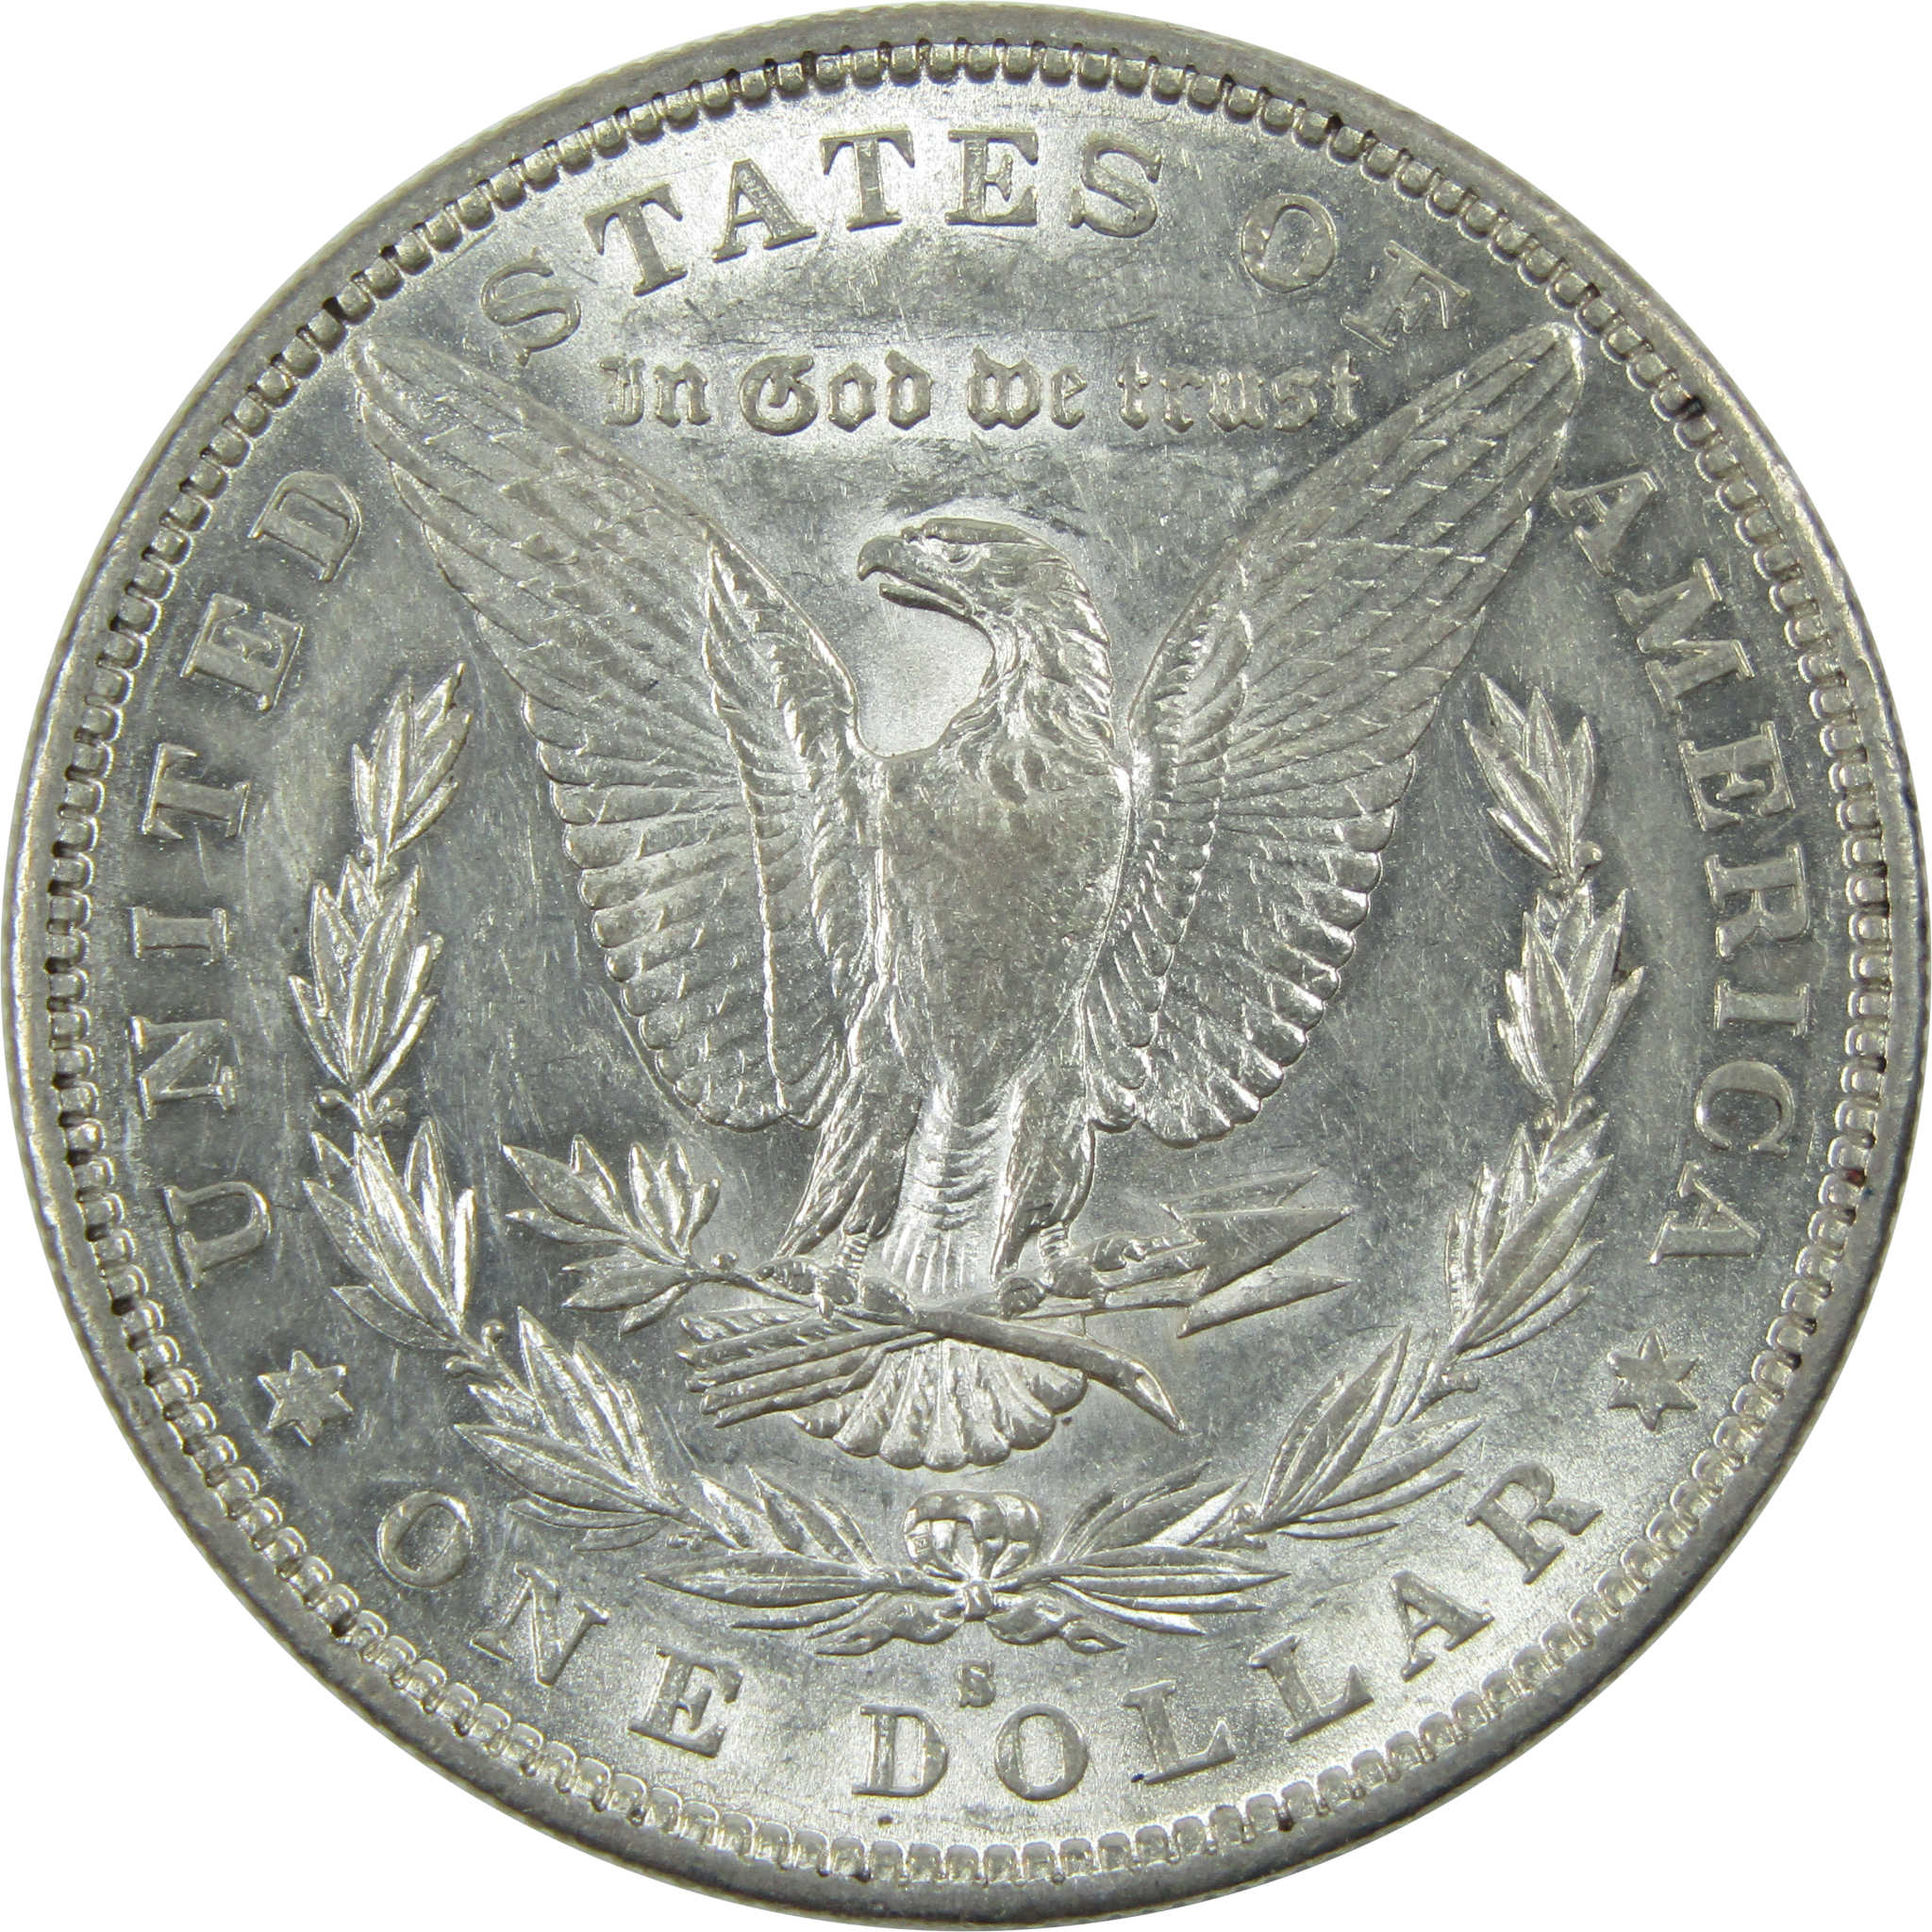 1885 S Morgan Dollar AU About Uncirculated Silver $1 Coin SKU:I13341